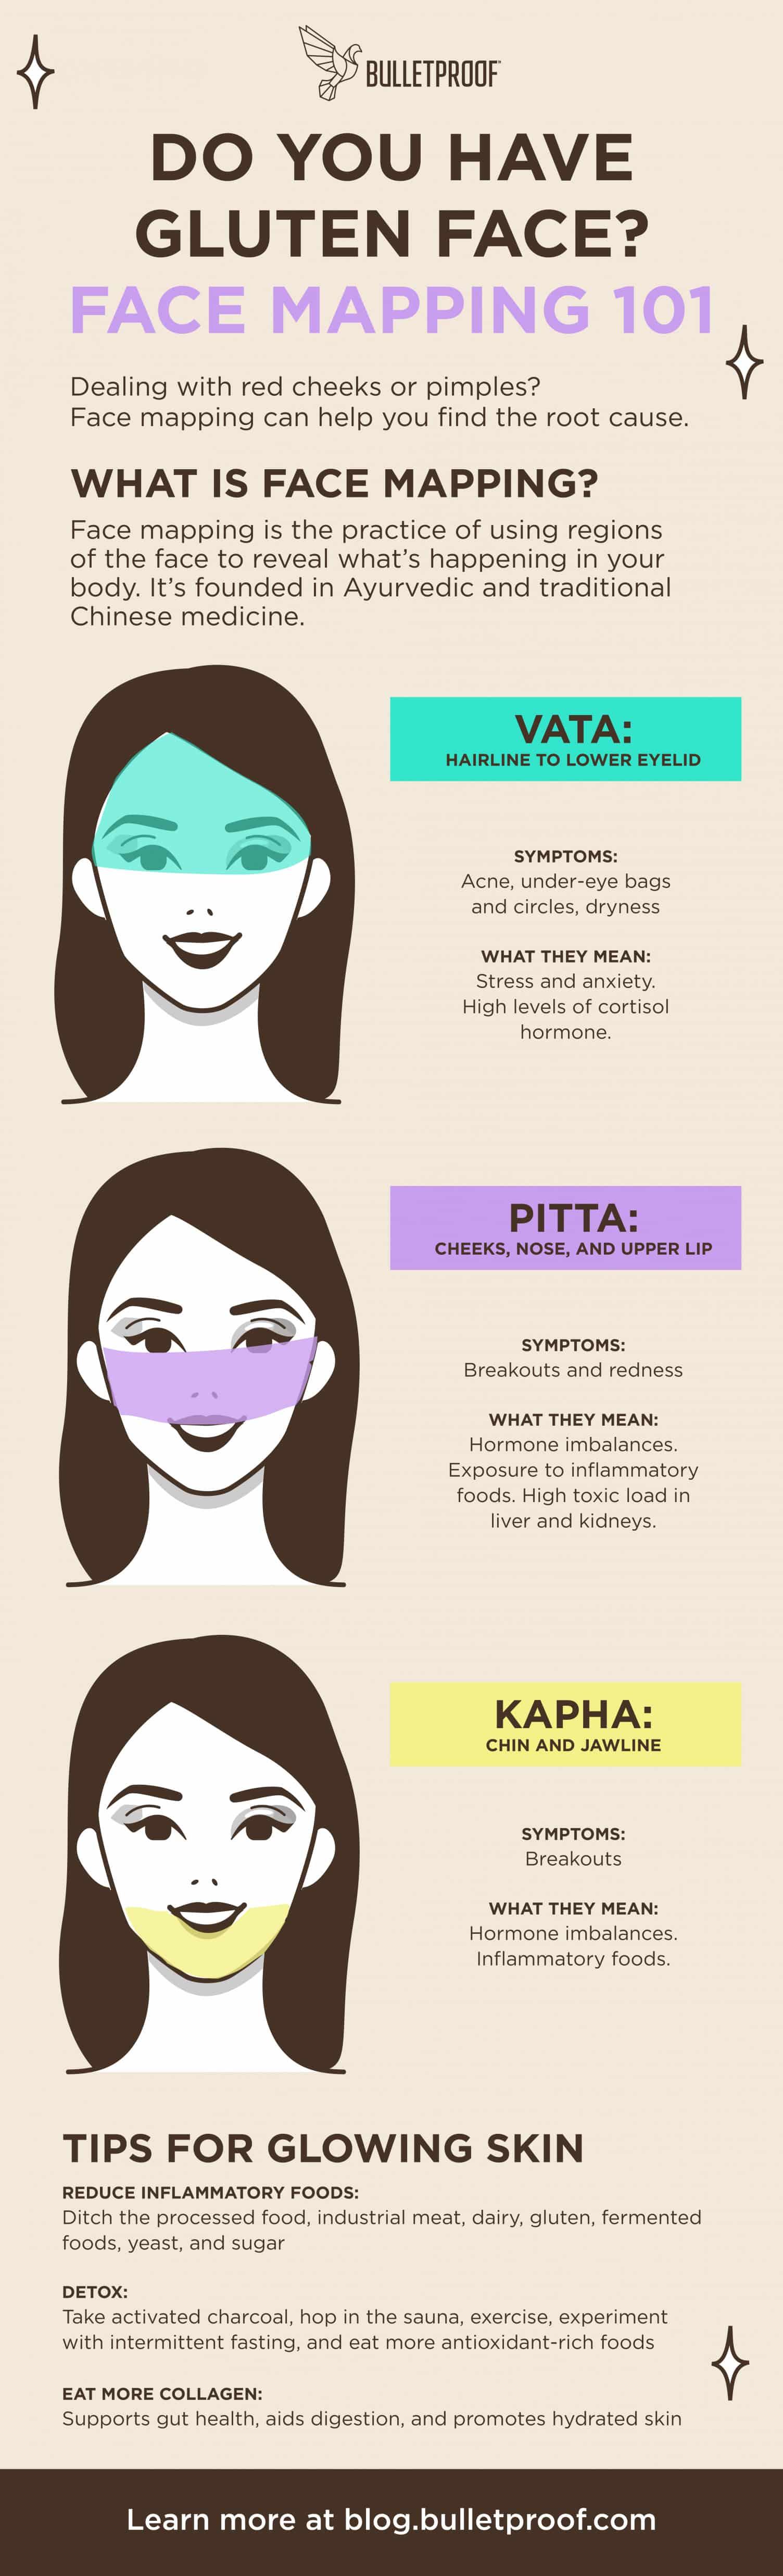 Face mapping infographic